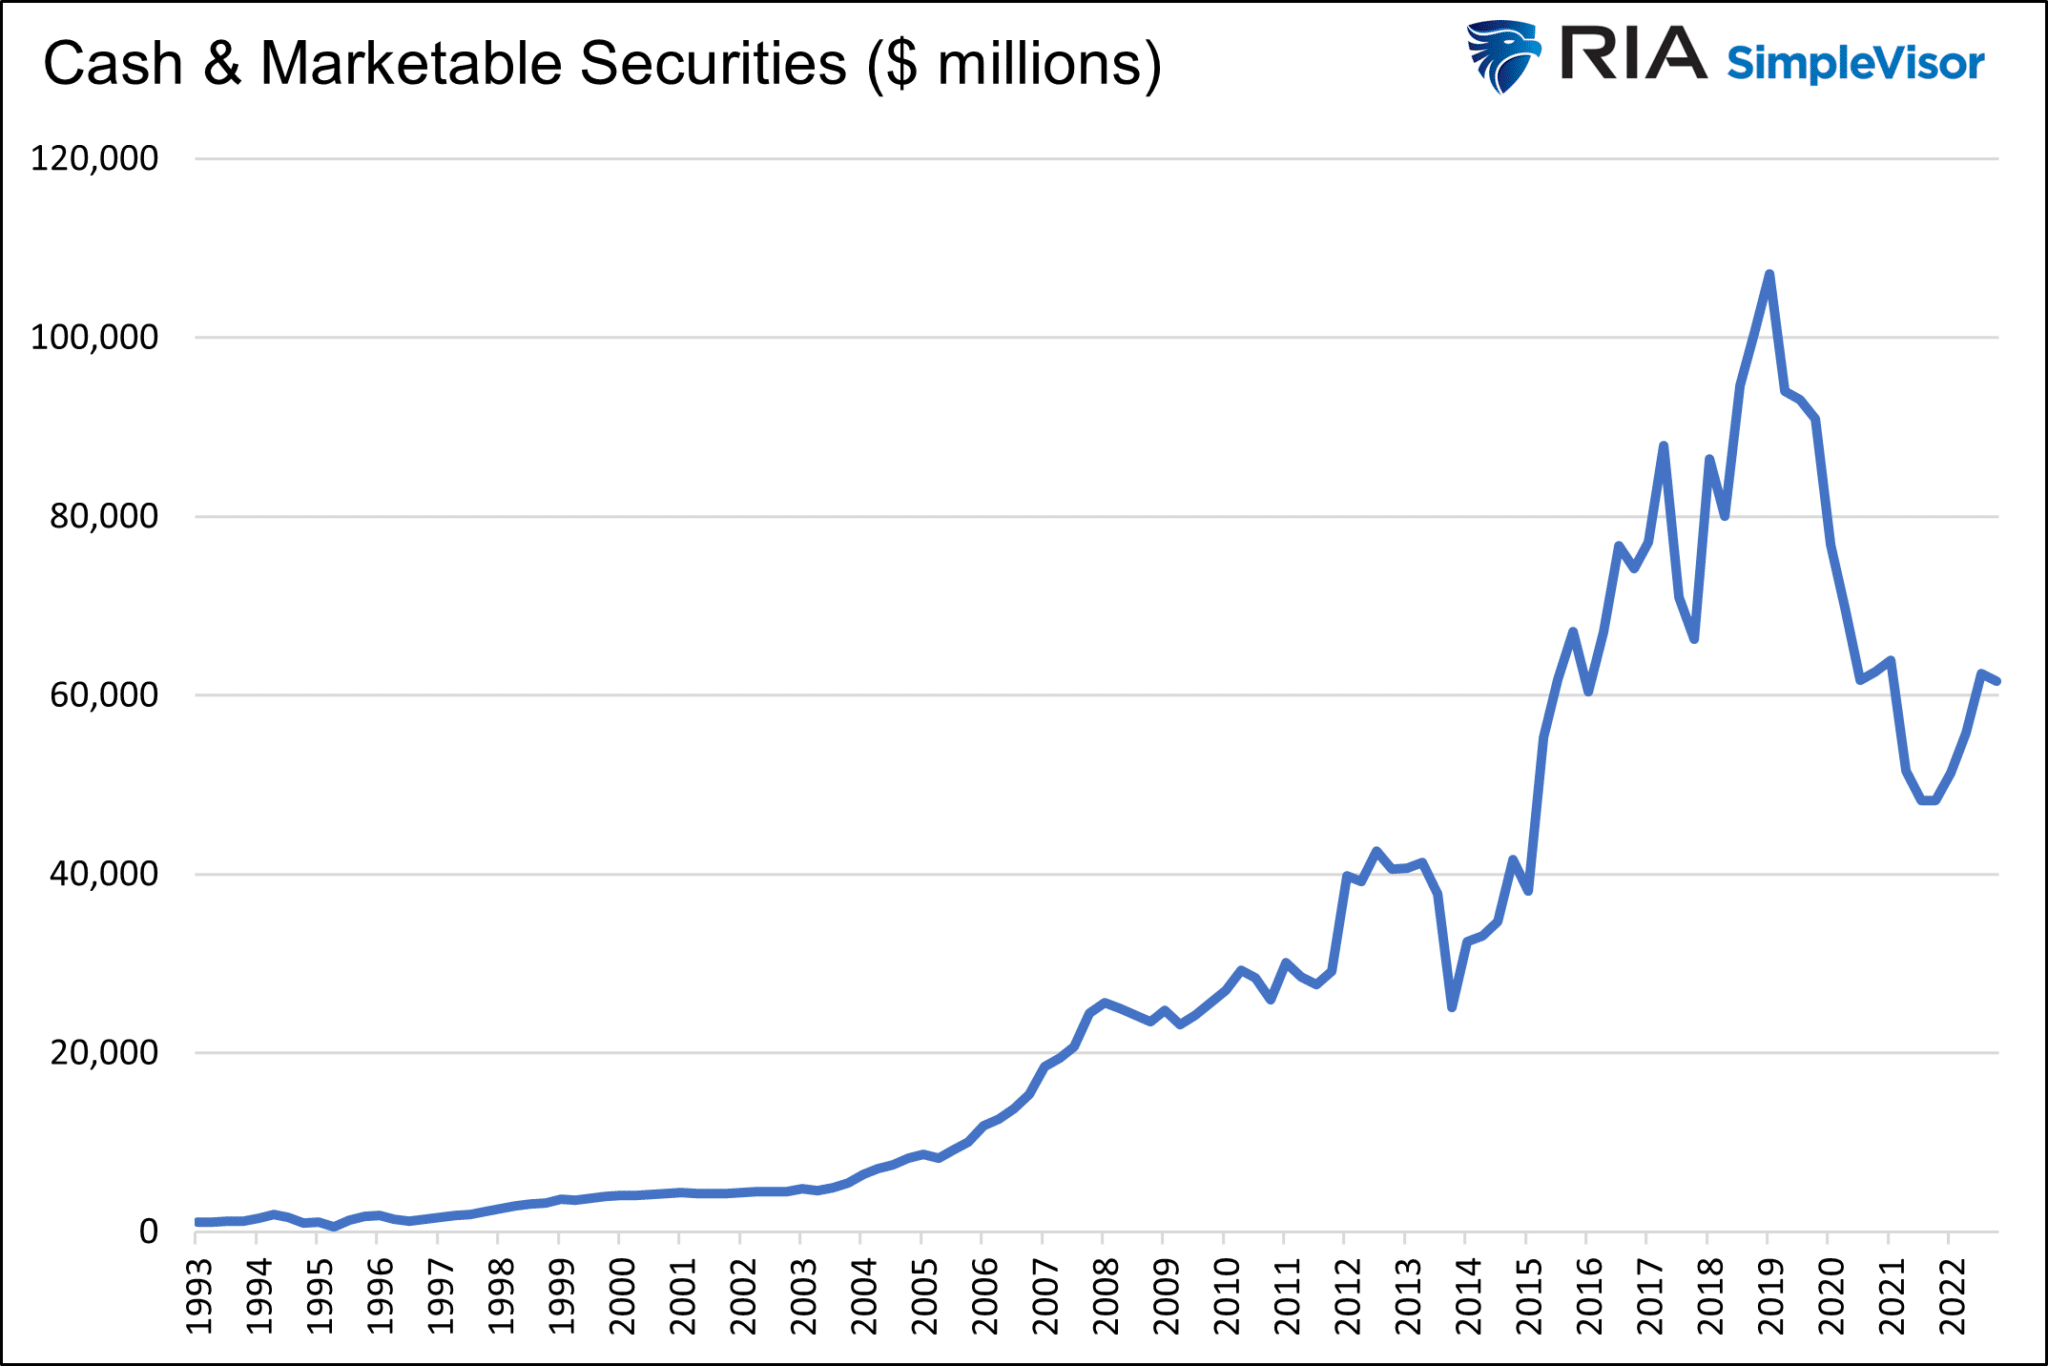 Apple Cash and Marketable Securities